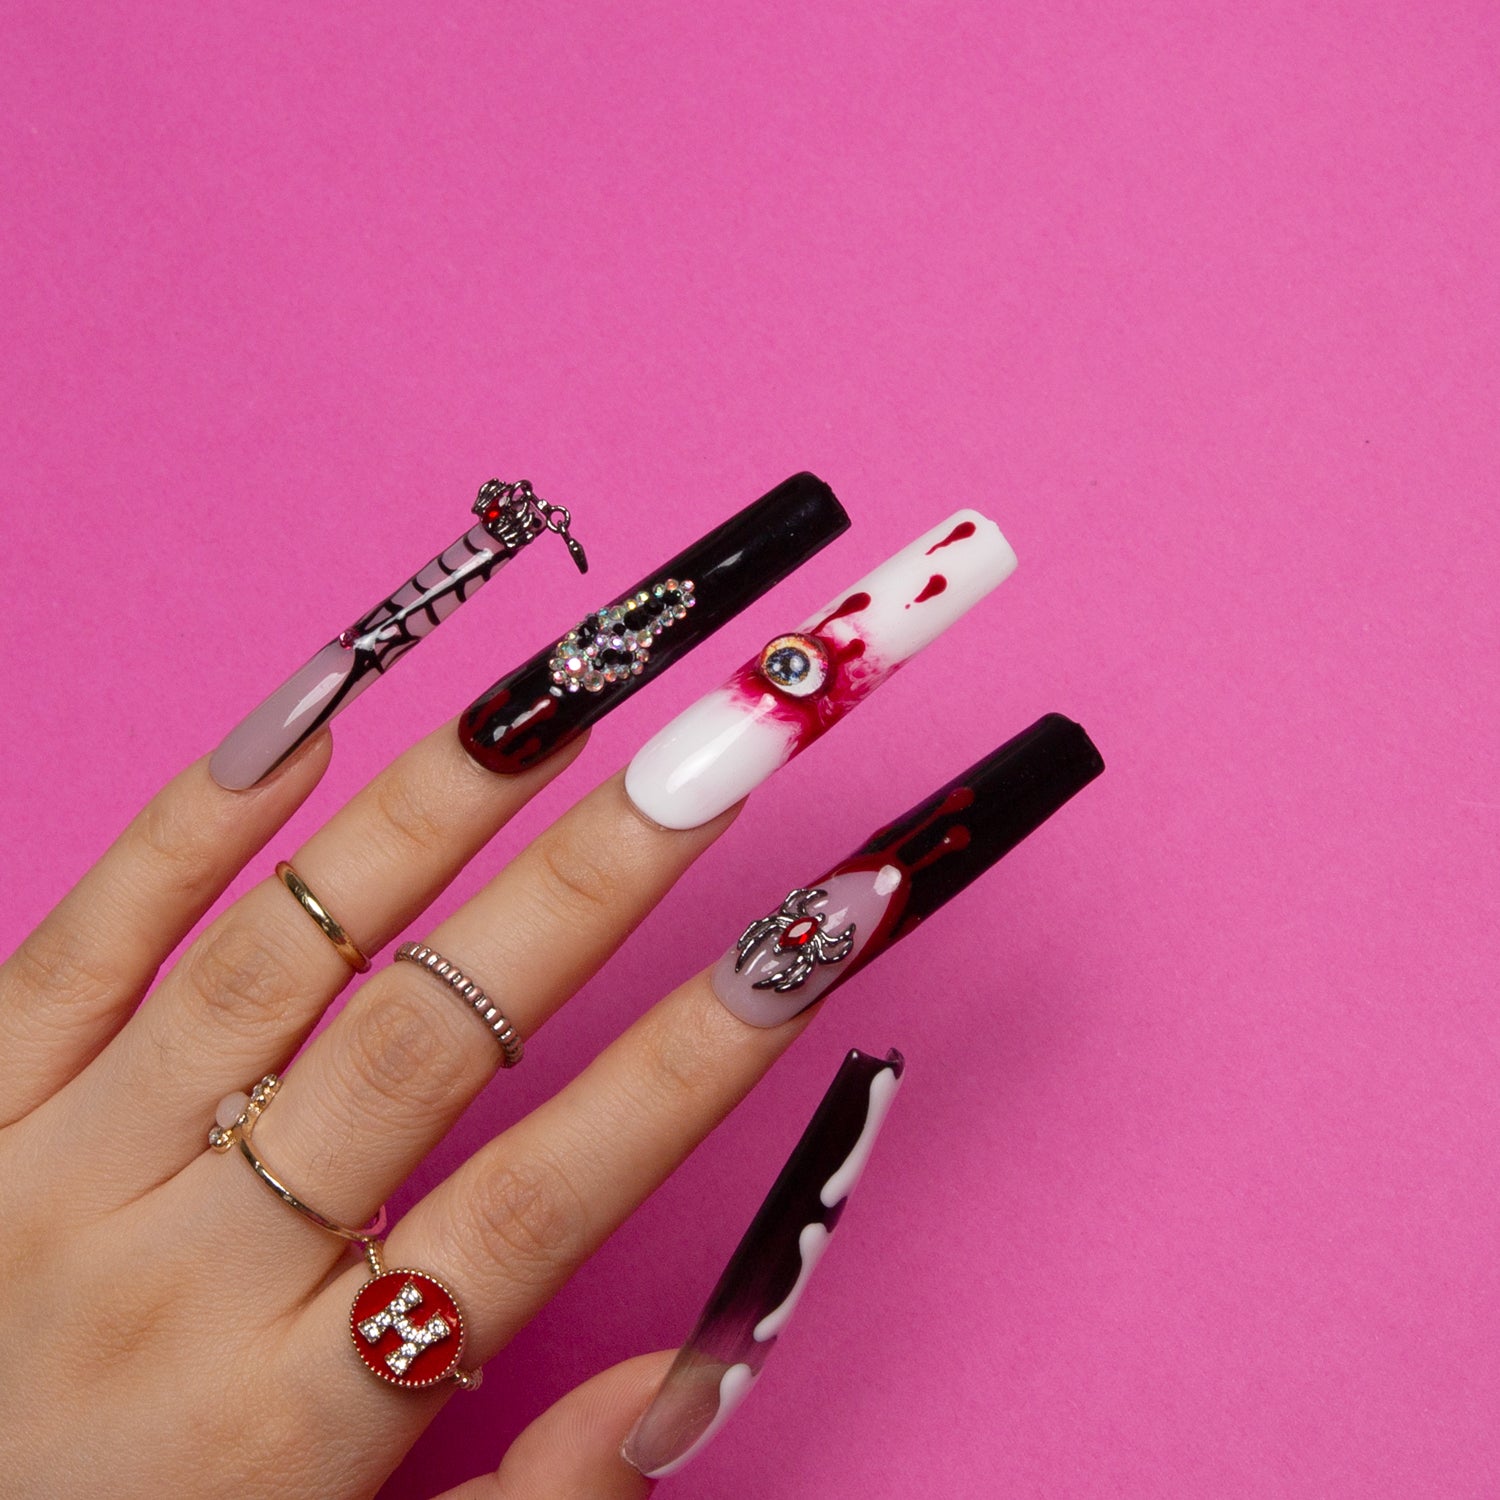 Hand with 'Final Destination' press-on acrylic nails in bold red and black hues. The nails feature spooky designs including eyes, ghosts, and bone patterns. Square-shaped nails with a macabre theme, perfect for Halloween.